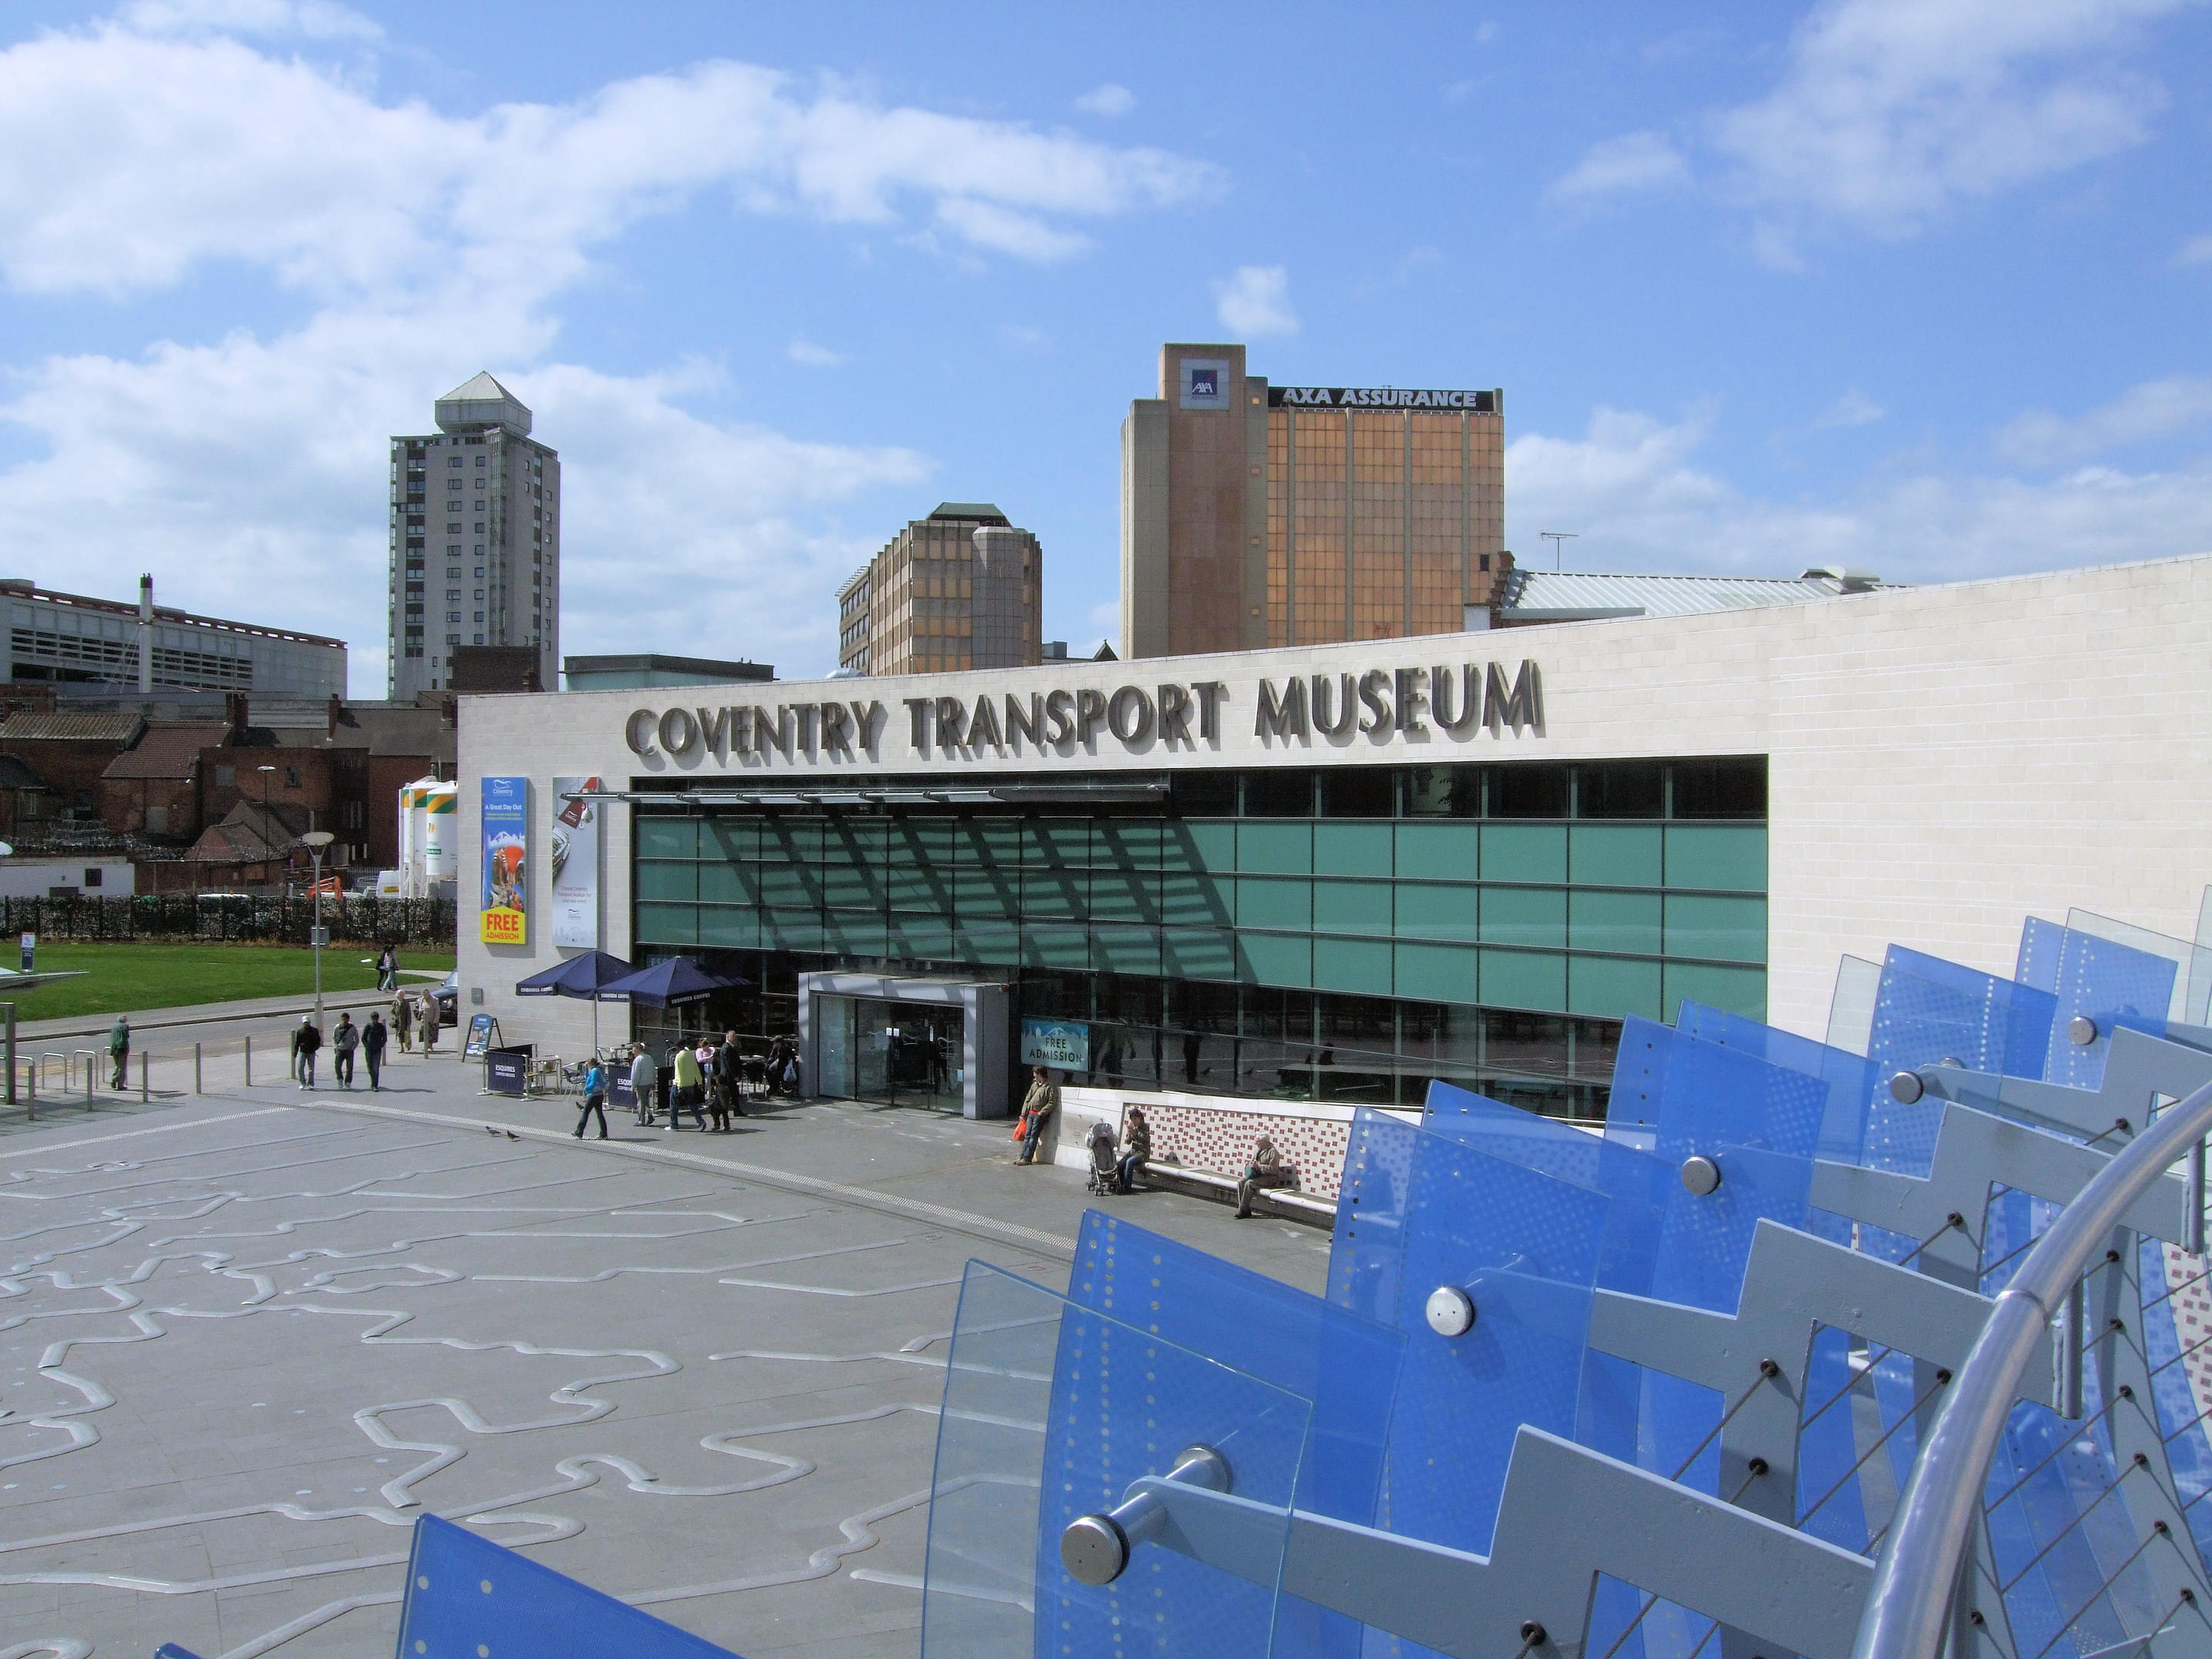 Coventry Transport Museum Overview